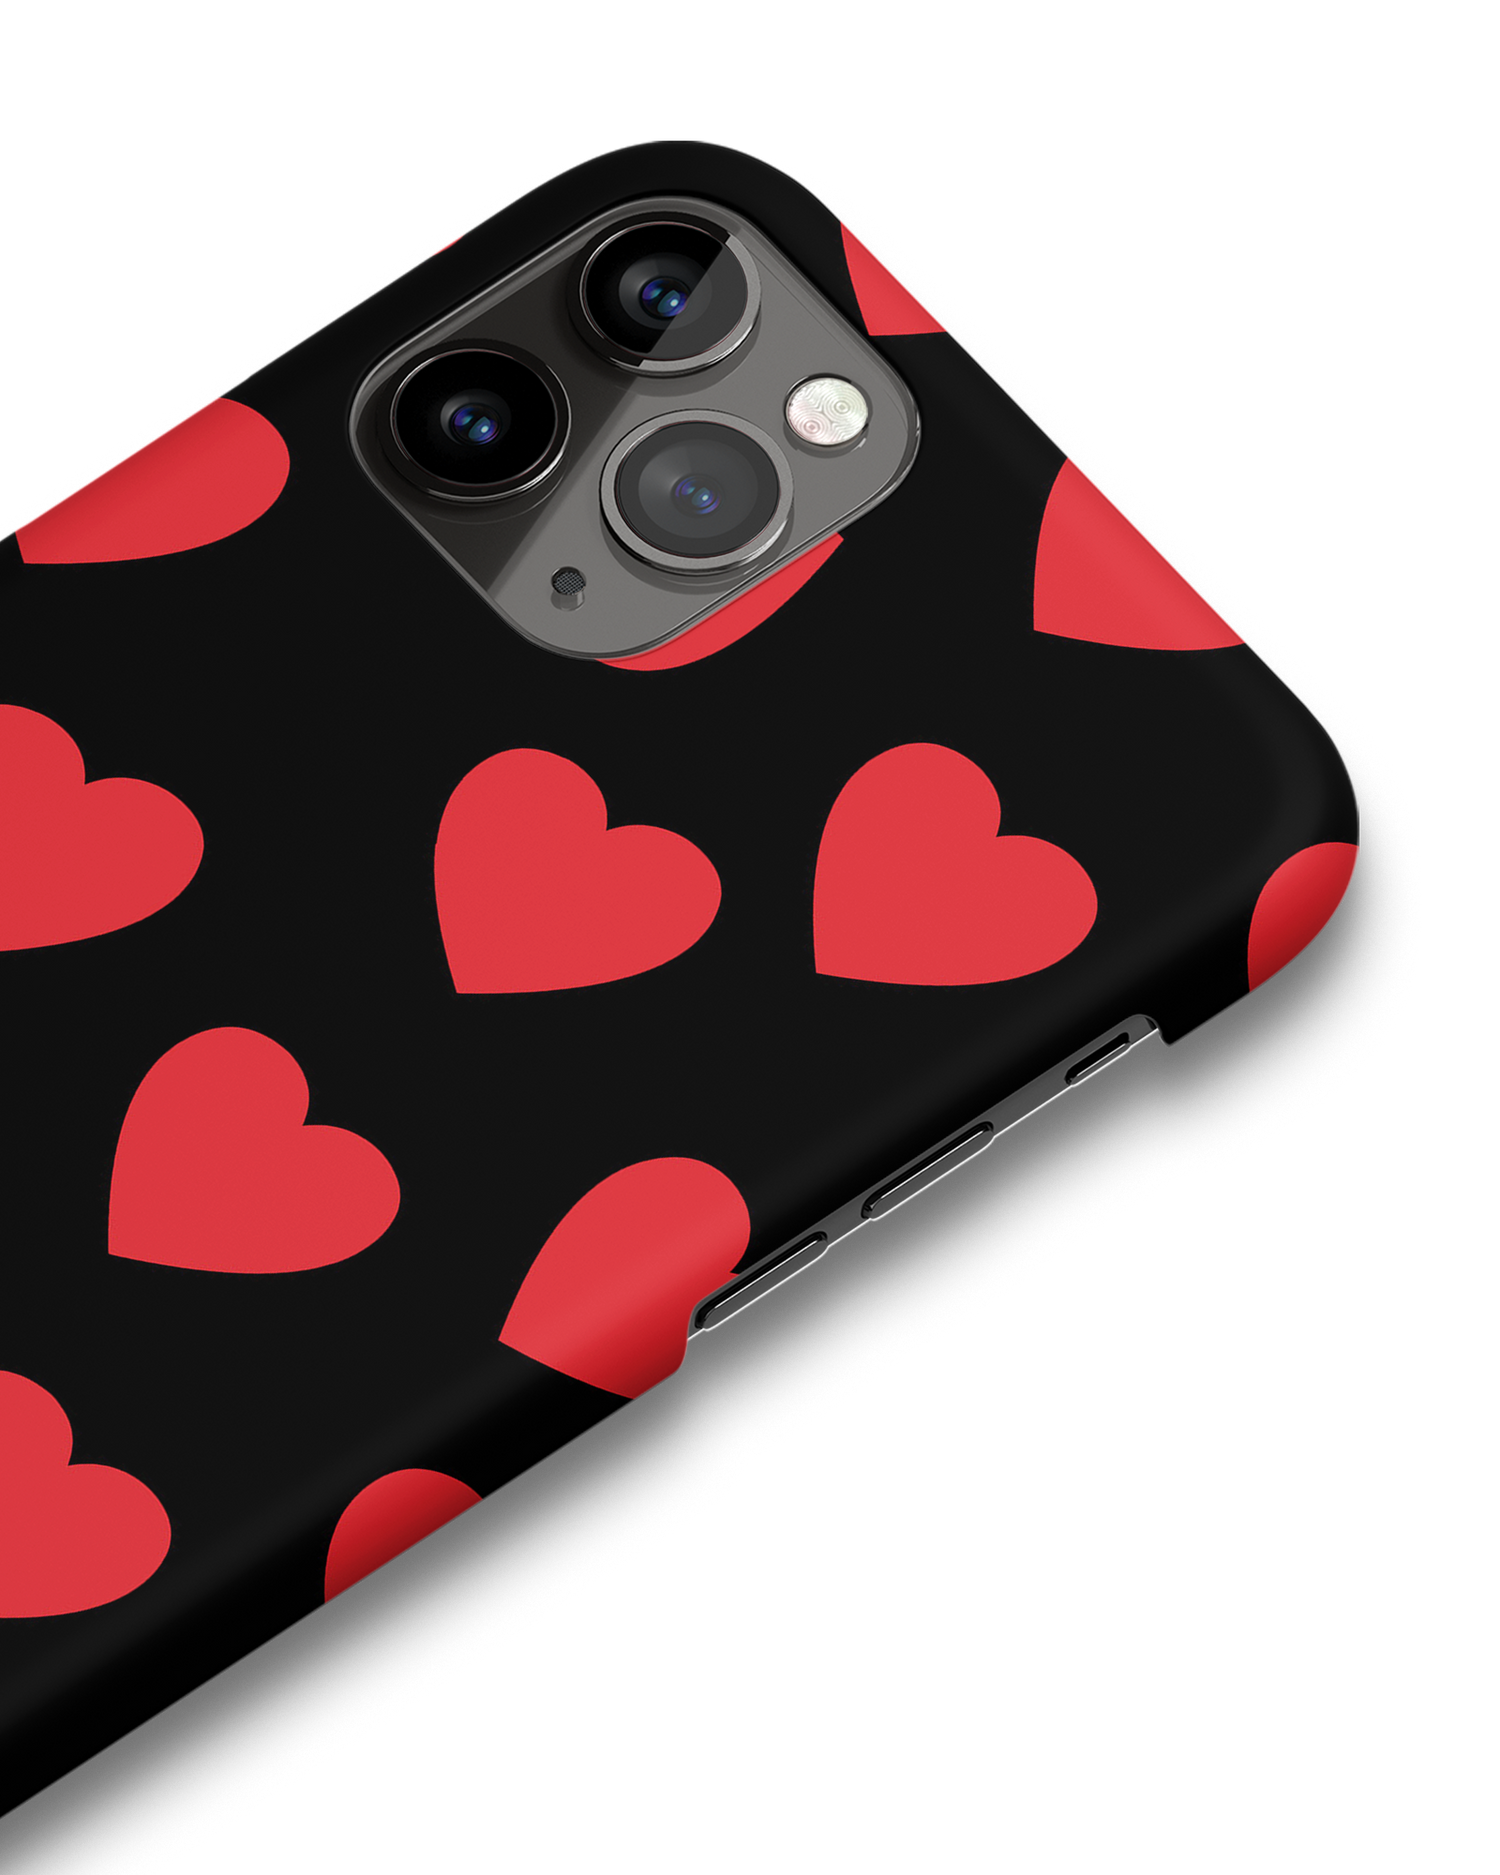 Repeating Hearts Hard Shell Phone Case Apple iPhone 11 Pro Max: Detail Shot